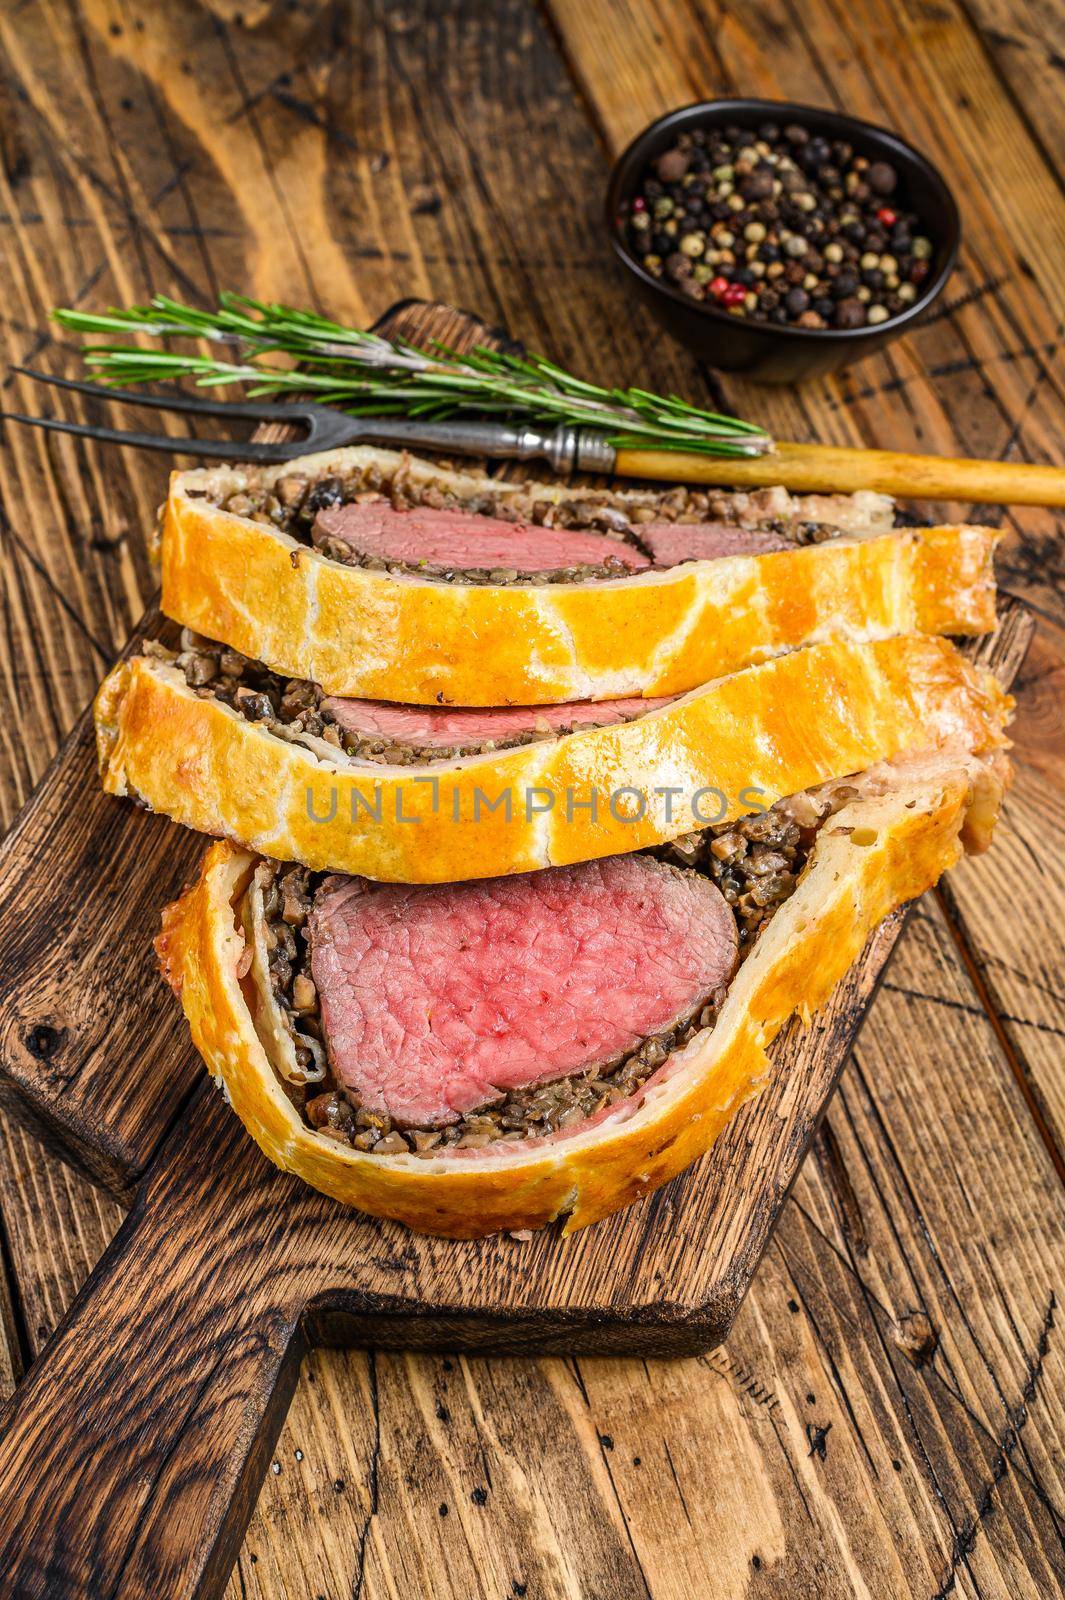 Sliced Beef Wellington pastry on a wooden cutting board. wooden background. Top view by Composter